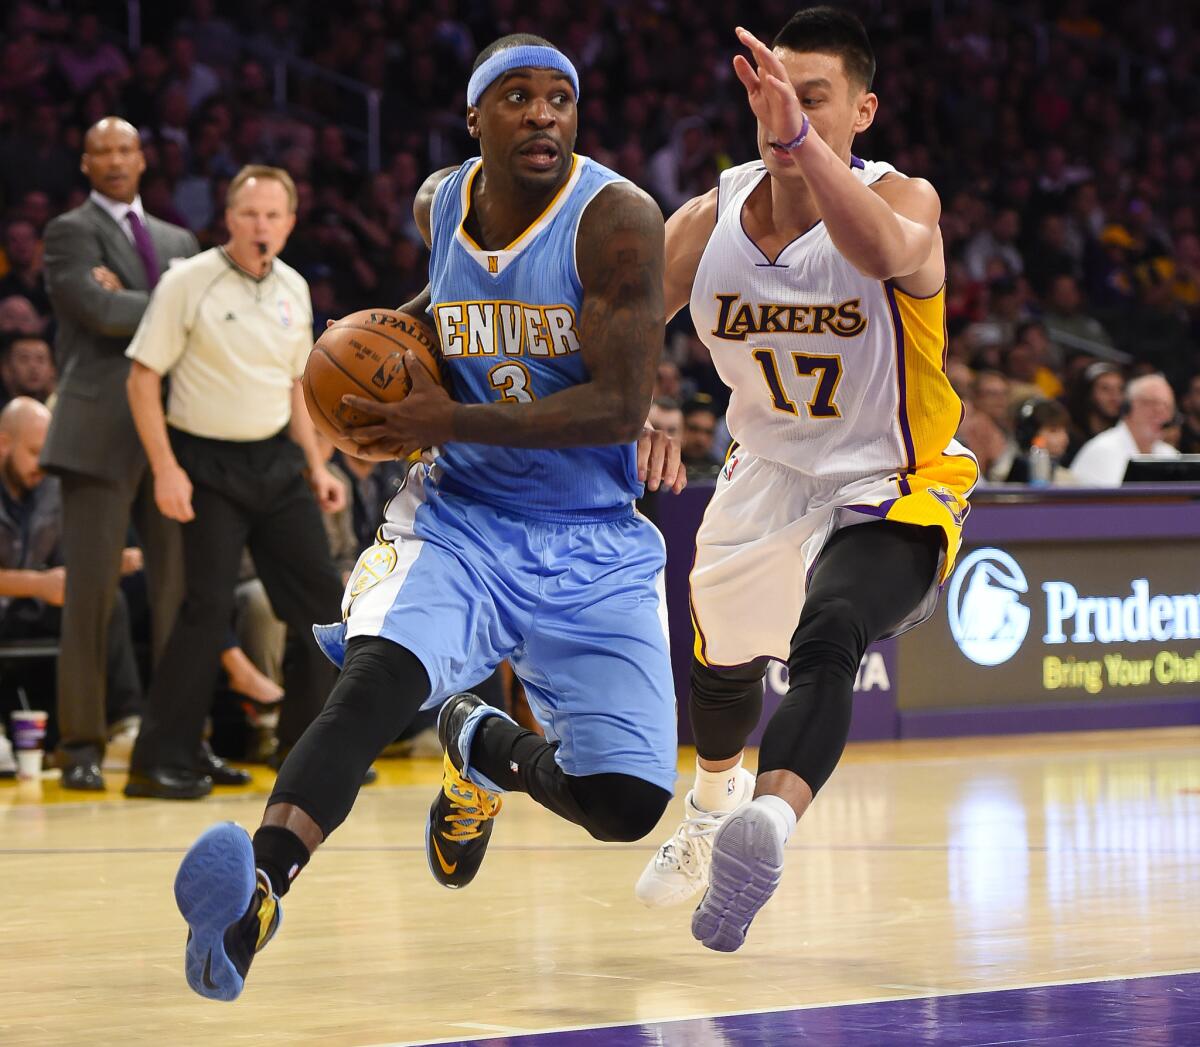 Denver guard Ty Lawson had 18 points and 16 assists in the Nuggets' 101-94 overtime victory Sunday over the Lakers at Staples Center.